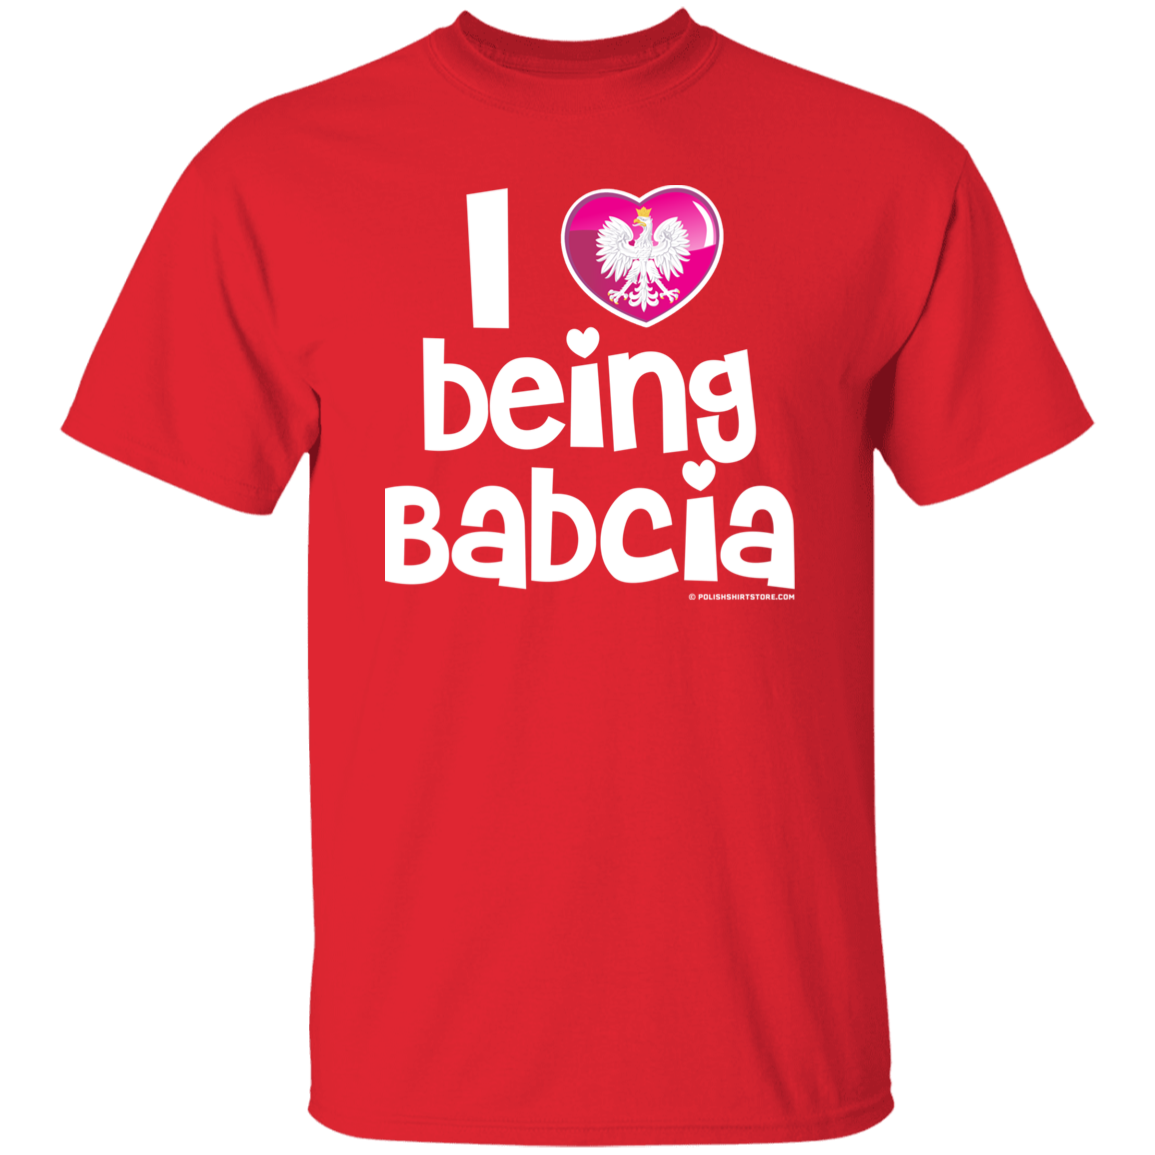 I Love Being Babcia Apparel CustomCat G500 5.3 oz. T-Shirt Red S